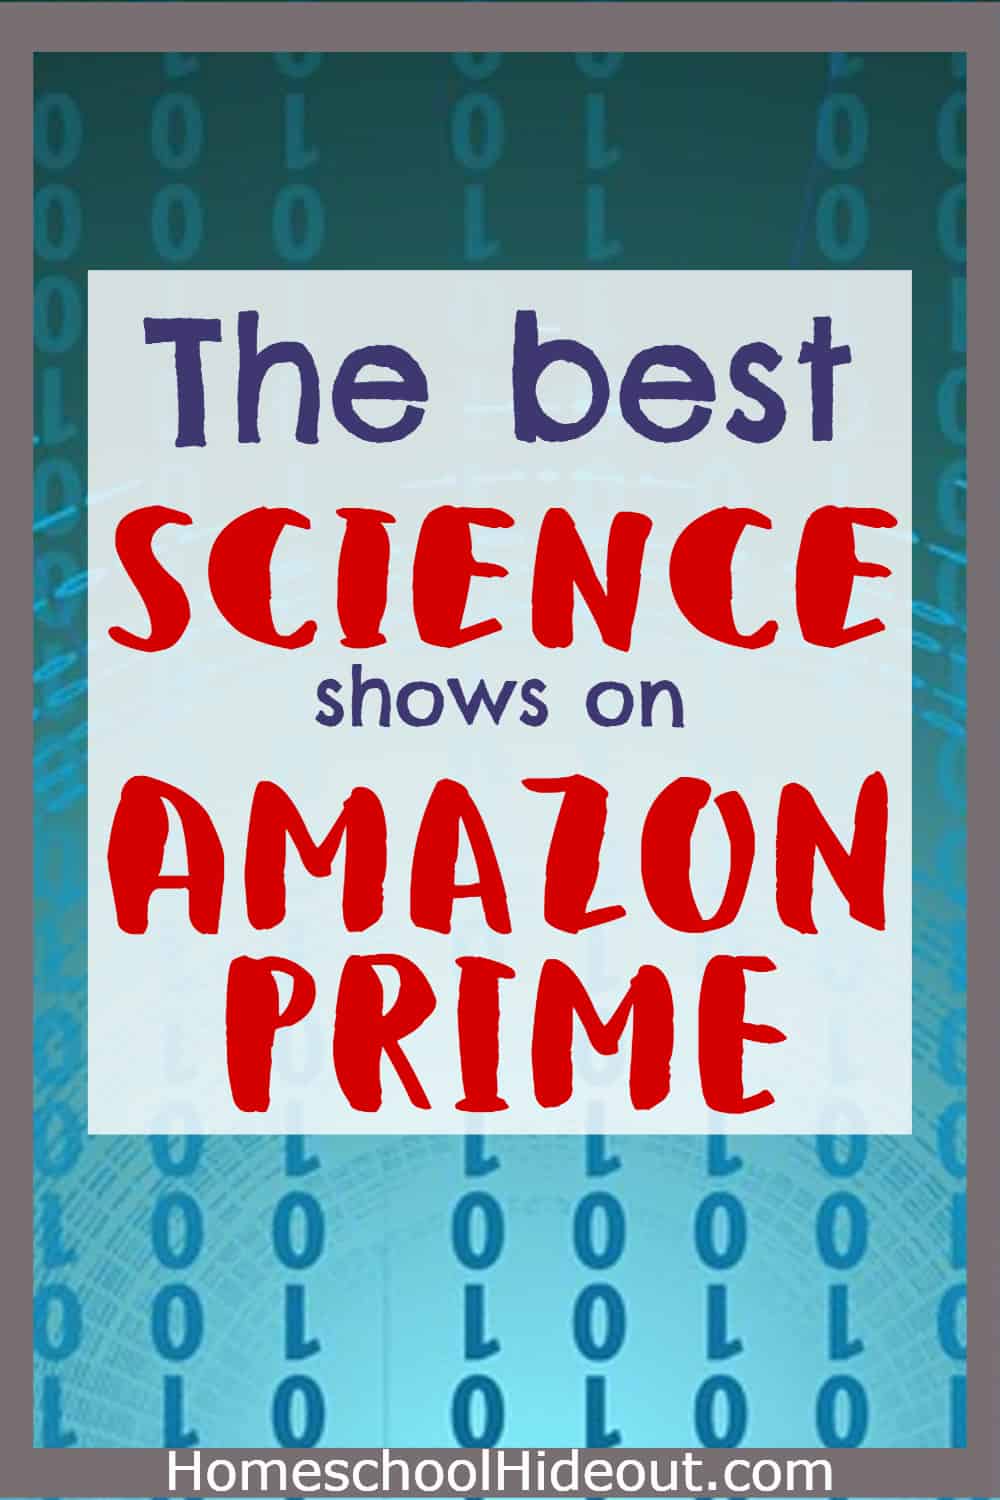 WHOA! This list of 100 educational shows on Amazon Prime is priceless!